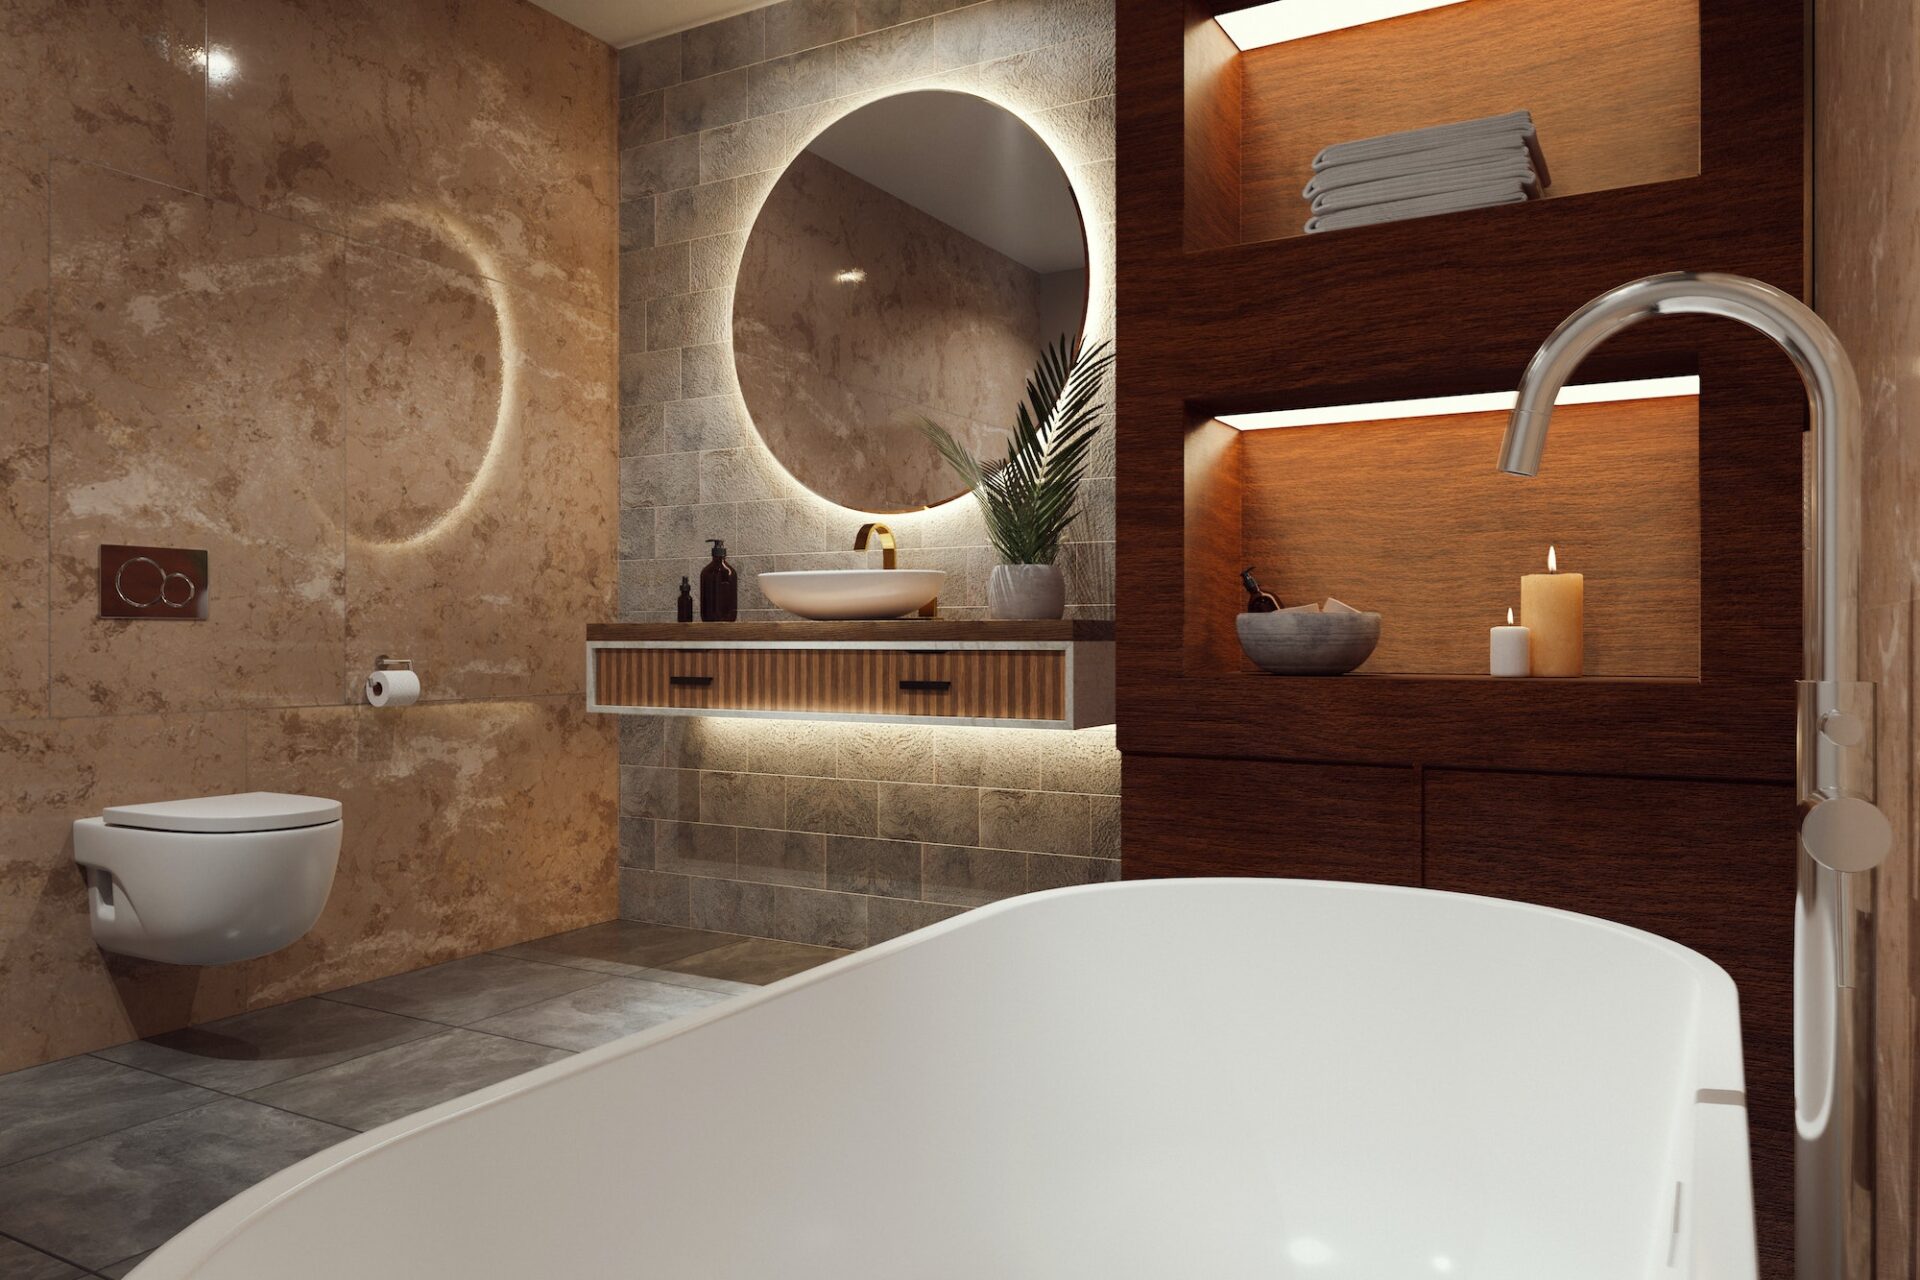 3D rendering bathroom, aromatherapy, relaxation, spa. Tiles, ceramics, wooden cupboard with candles